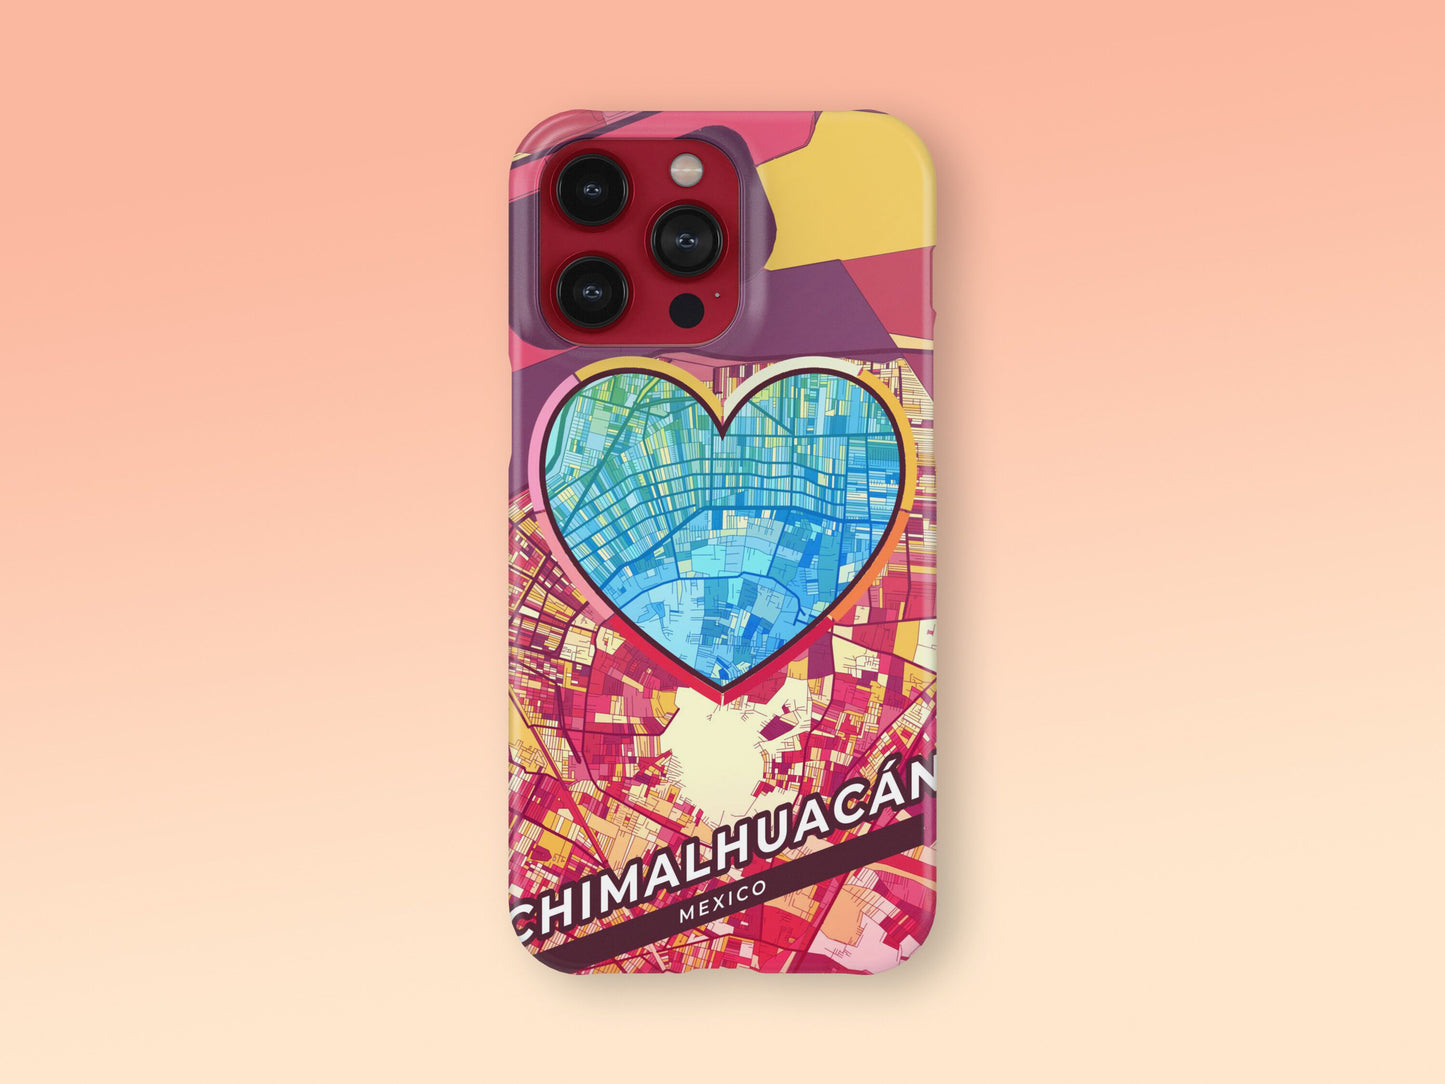 Chimalhuacán Mexico slim phone case with colorful icon. Birthday, wedding or housewarming gift. Couple match cases. 2